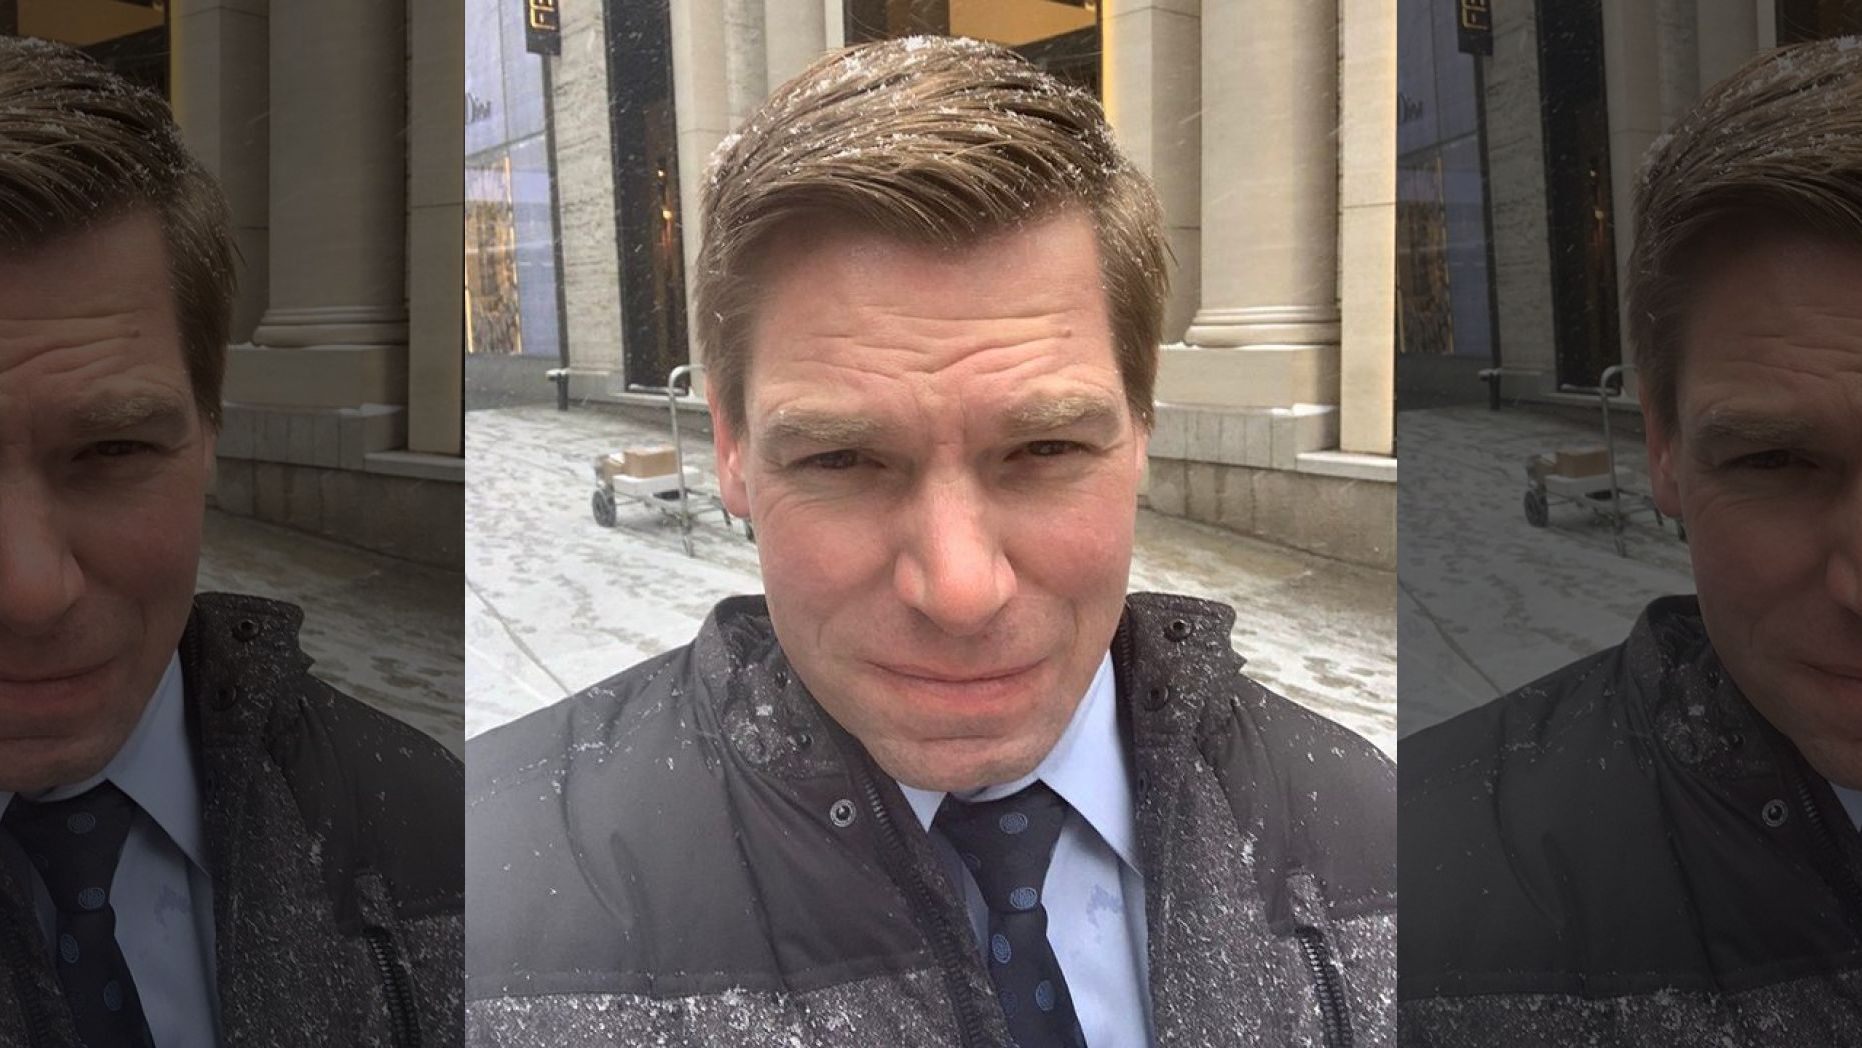 eric-swalwell’s-campaign-dropped-nearly-$60k-on-travel-in-six-weeks,-including-hotels-in-miami-and-paris